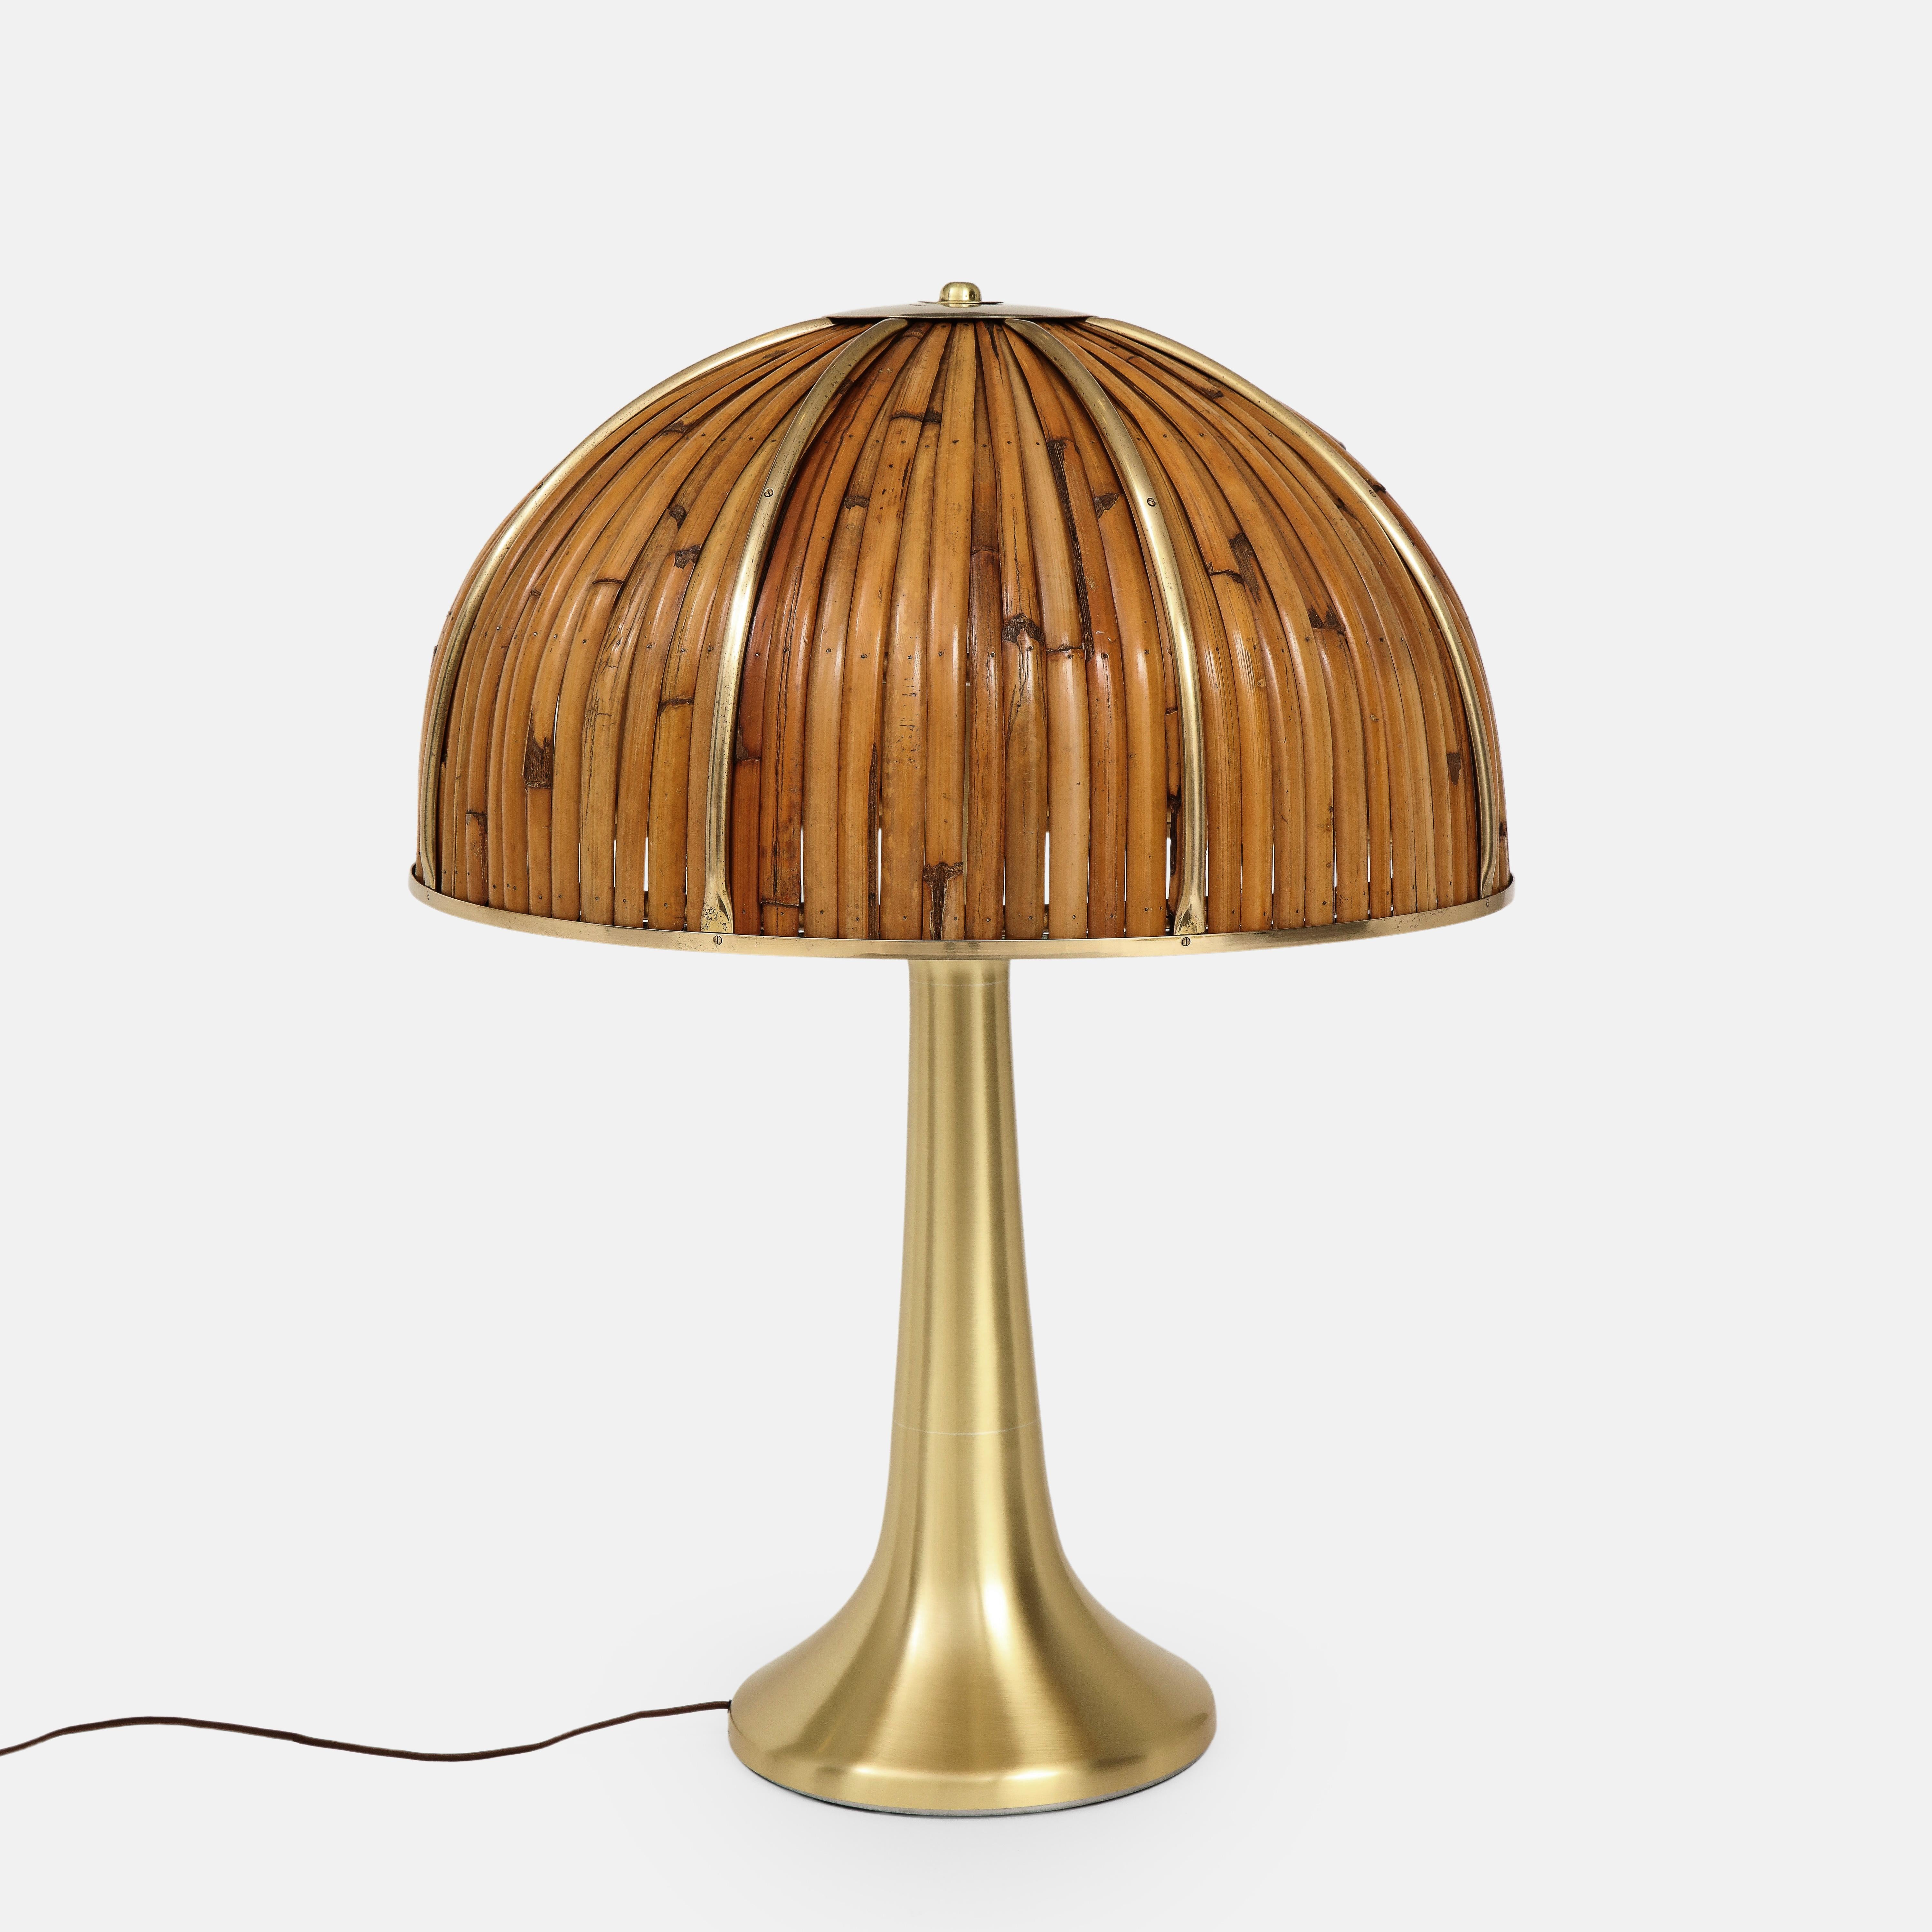 Mid-Century Modern Gabriella Crespi Rare Large 'Fungo' Table Lamp in Bamboo and Brass, Italy, 1970s